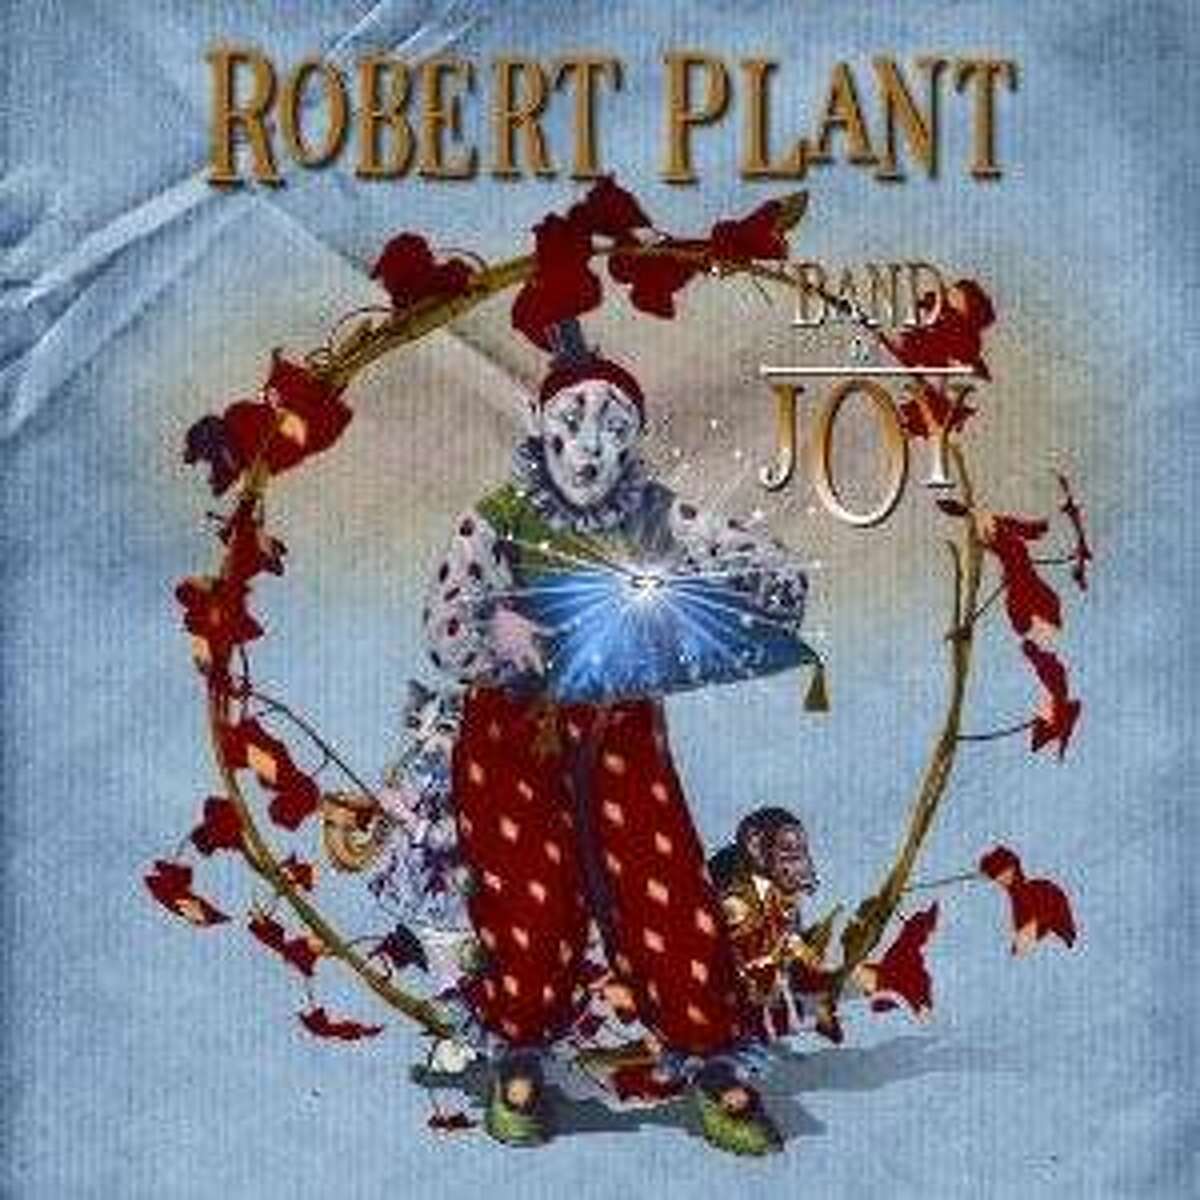 cd cover BAND OF JOY by ROBERT PLANT